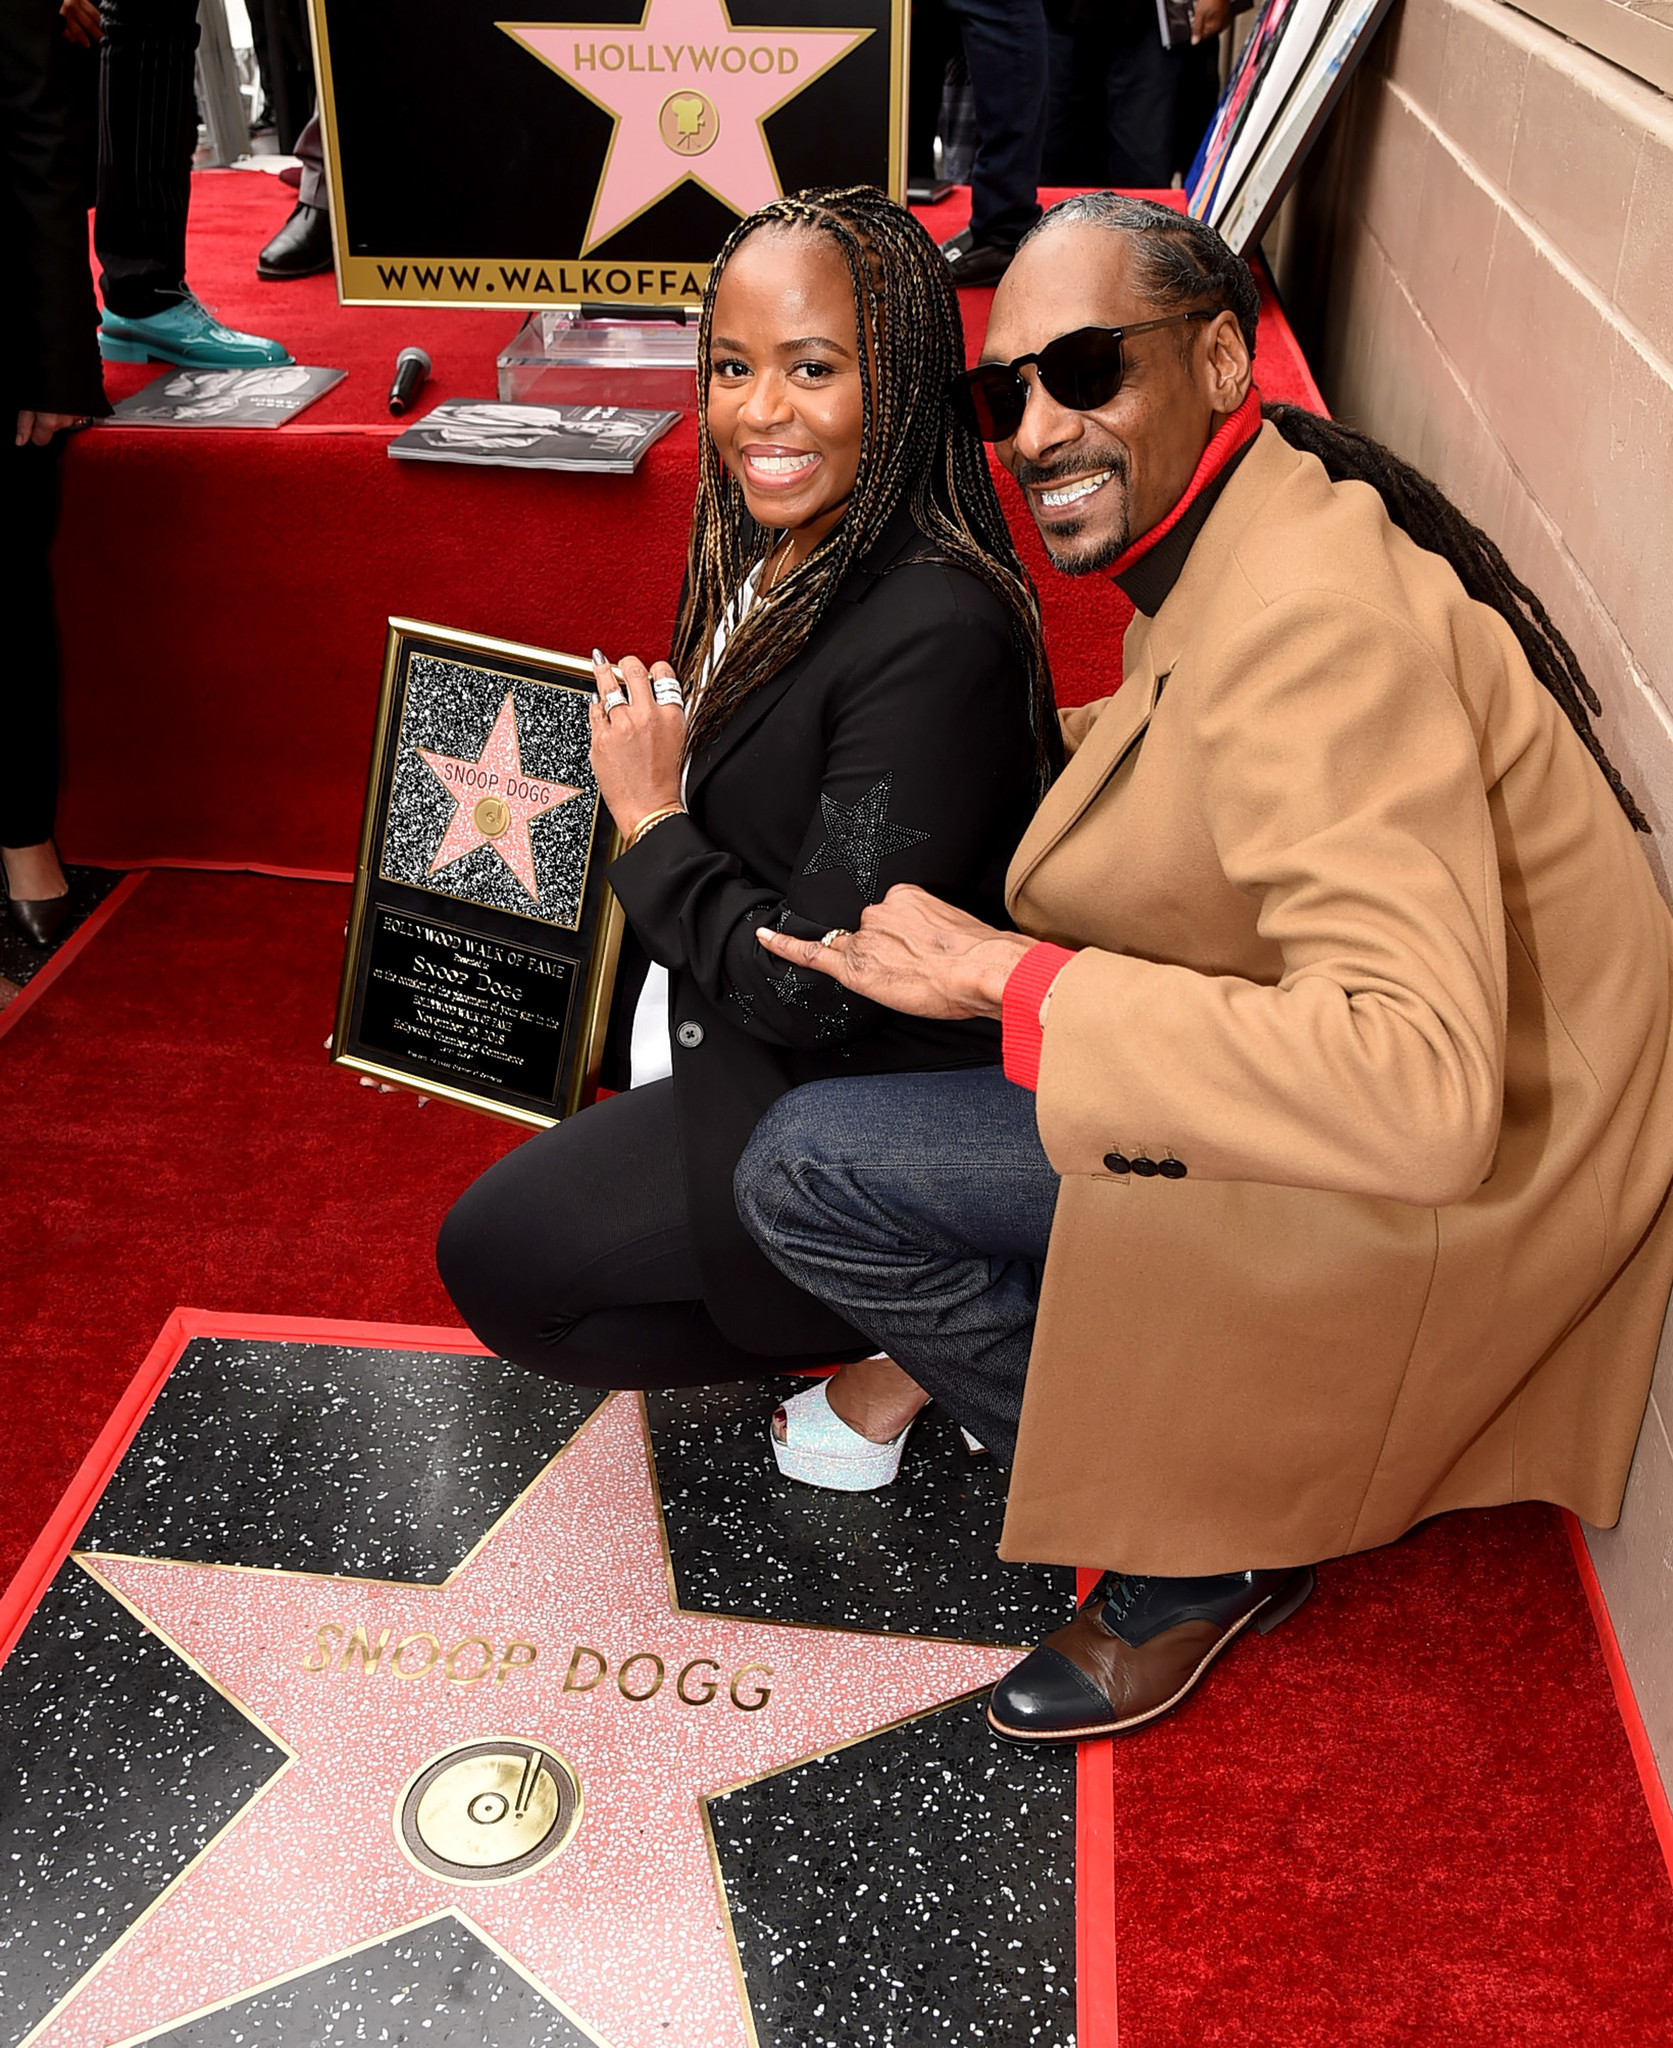 Snoop Dogg, with his wife Shante Broadus, is honored with a star on The Hollywood Walk Of Fame on Hollywood Boulevard on Nov. 19, 2018 in Los Angeles, Calif. Esteemed among his family and famous friends, Snoop Dogg's Hollywood Walk of Fame ceremony was a star-studded event including Dr. Dre, Quincy Jones, Pharrell Williams and Jimmy Kimmel.